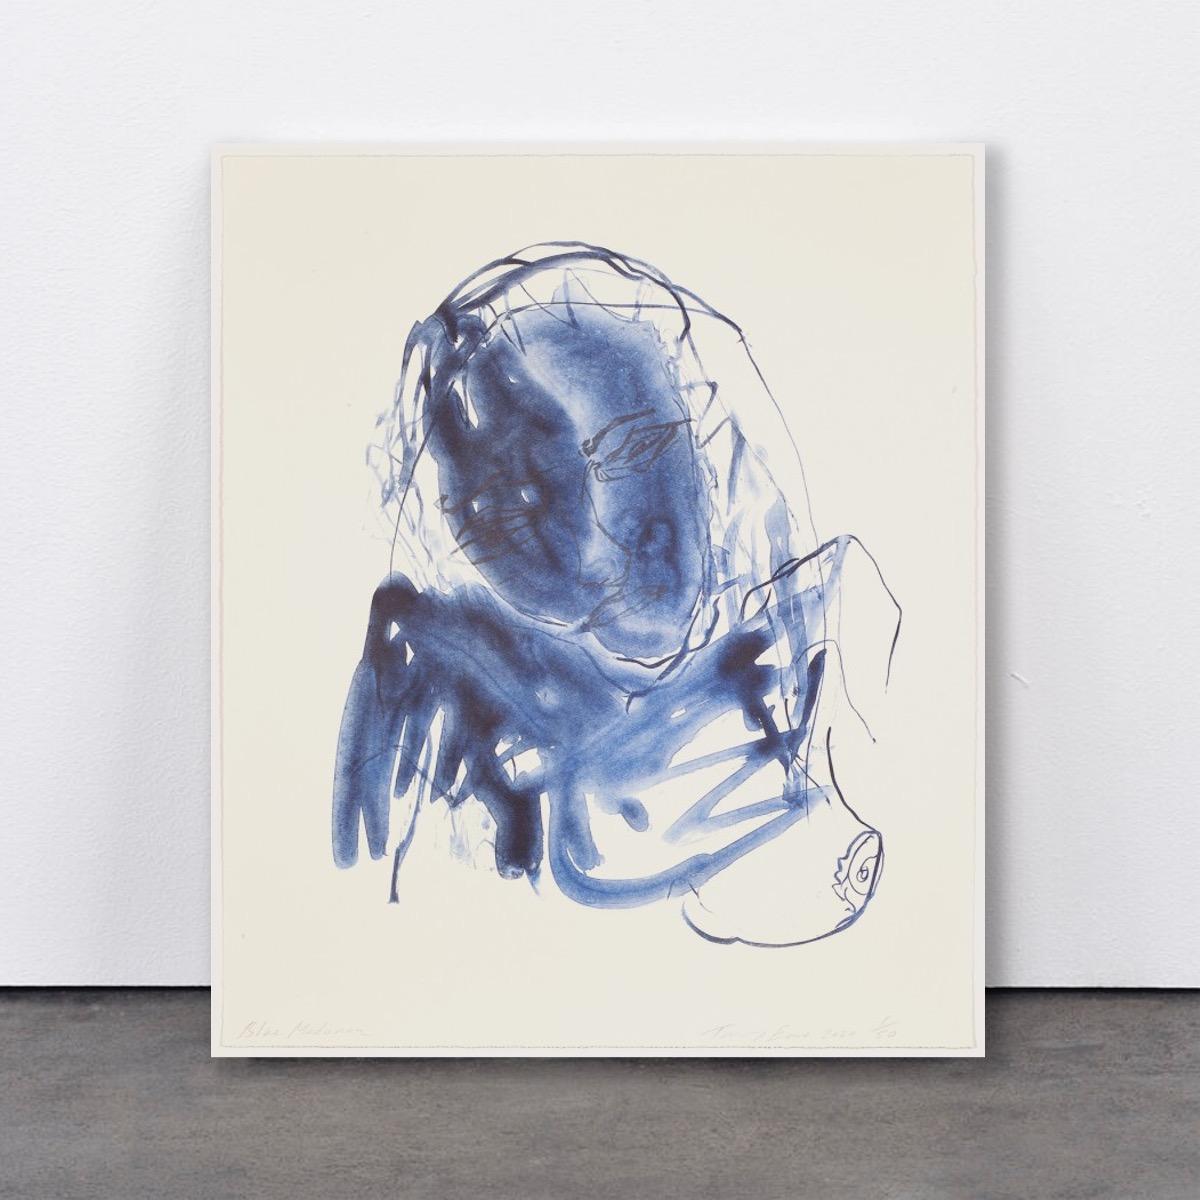 Blue Madonna - Emin, Contemporary, YBAs, Lithograph, Portrait, Black
3 colour lithograph on Somerset Velvet Warm White 400gsm
Edition of 50
65,5 x 55,5 cm (25.8 x 21.9 in)
Signed, numbered, and dated by the artist
In mint condition
With certificate